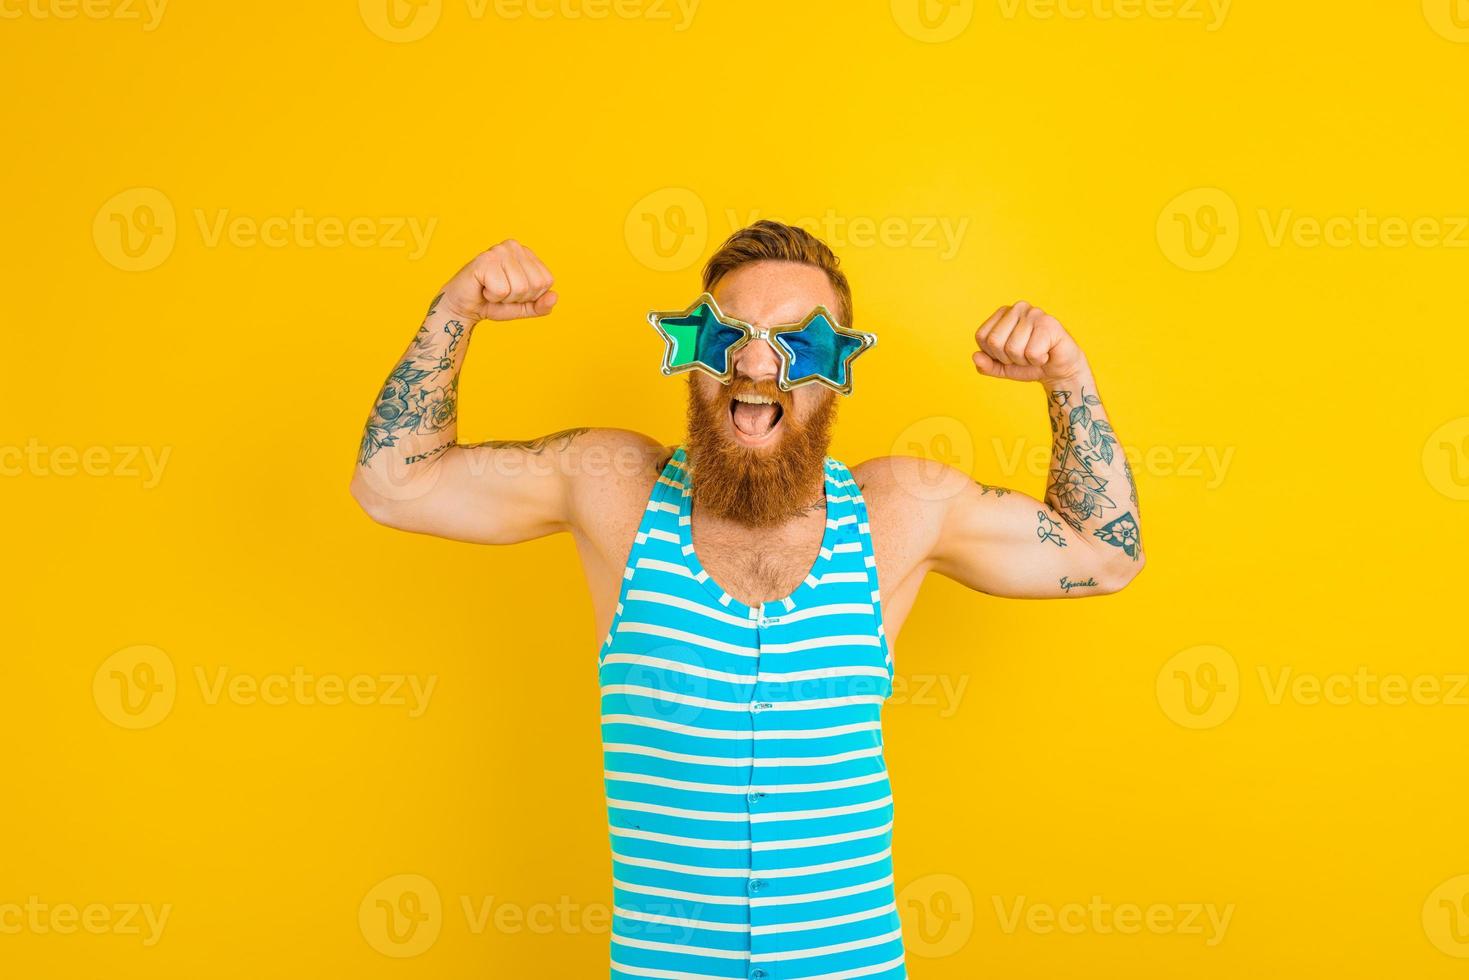 man with beard,tattoos and swimsuit shows his muscle photo